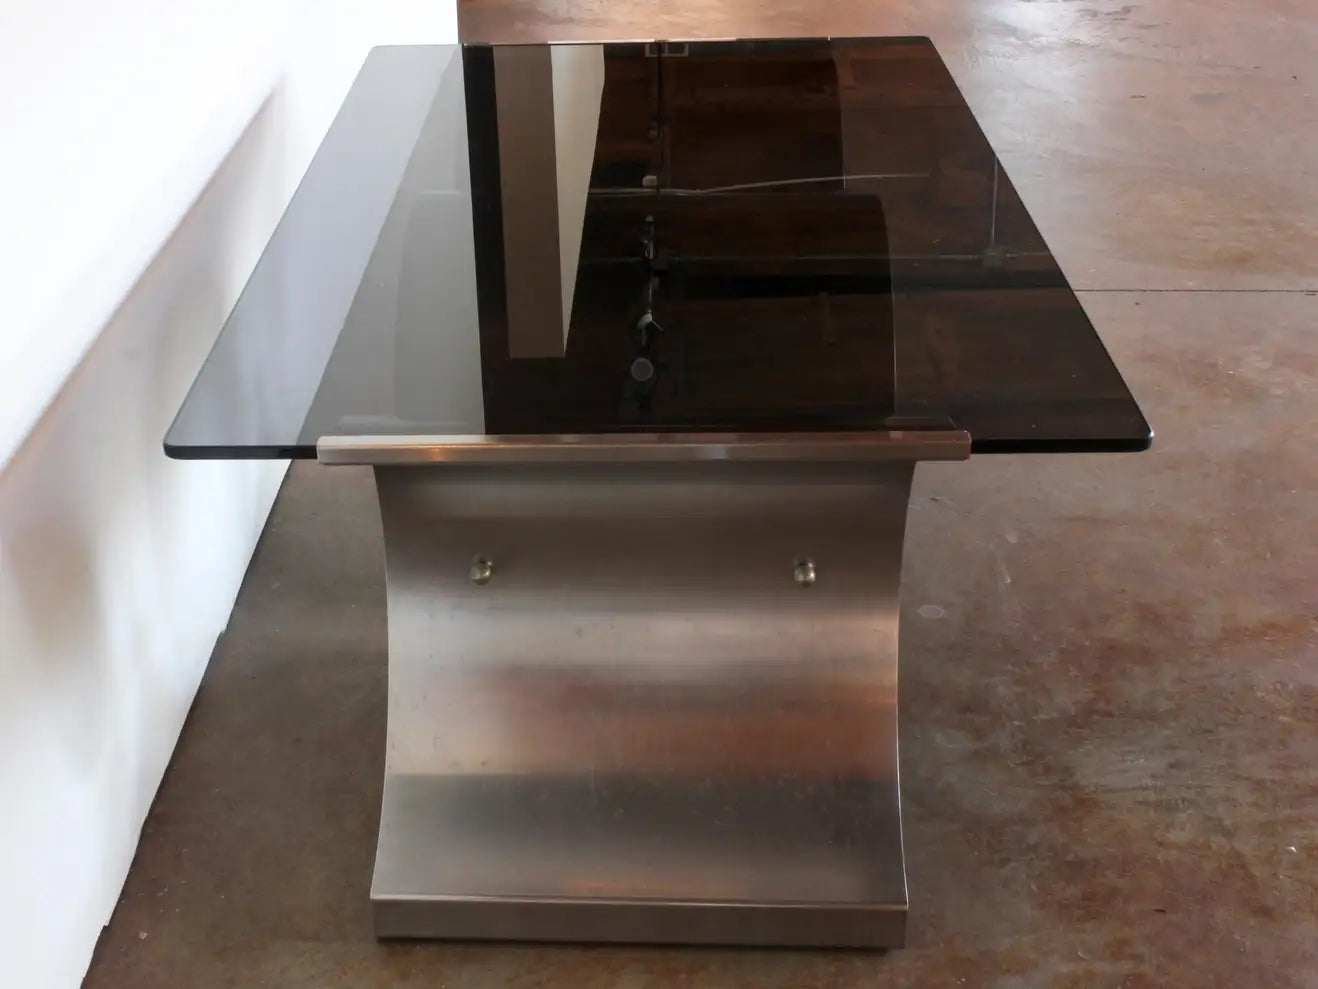 Steel and Glass Coffee Table by Francois Monnet for Kappa, French, c. 1970